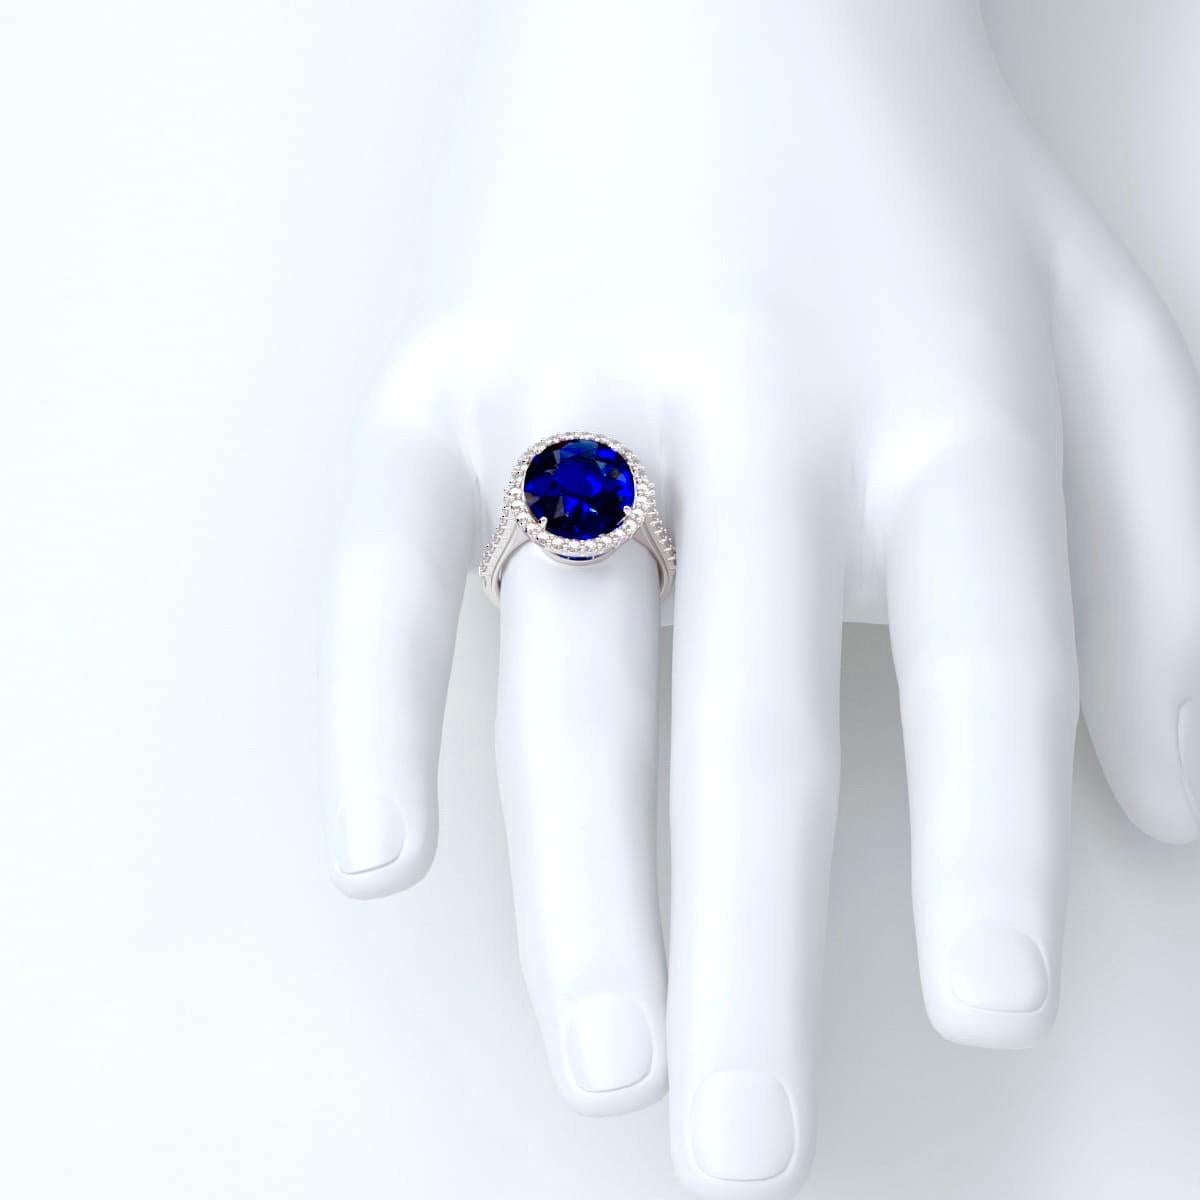 Approx total weight: 9.00cts
Center Stone: 8.05ct Oval Certified Ceylon Sri Lanka Sapphire with excellent cutting, color, and clarity. The stone is a rich ideal blue color and totally eye clean.
Diamond Color: E-F 
Diamond Clarity: Vs
Please include